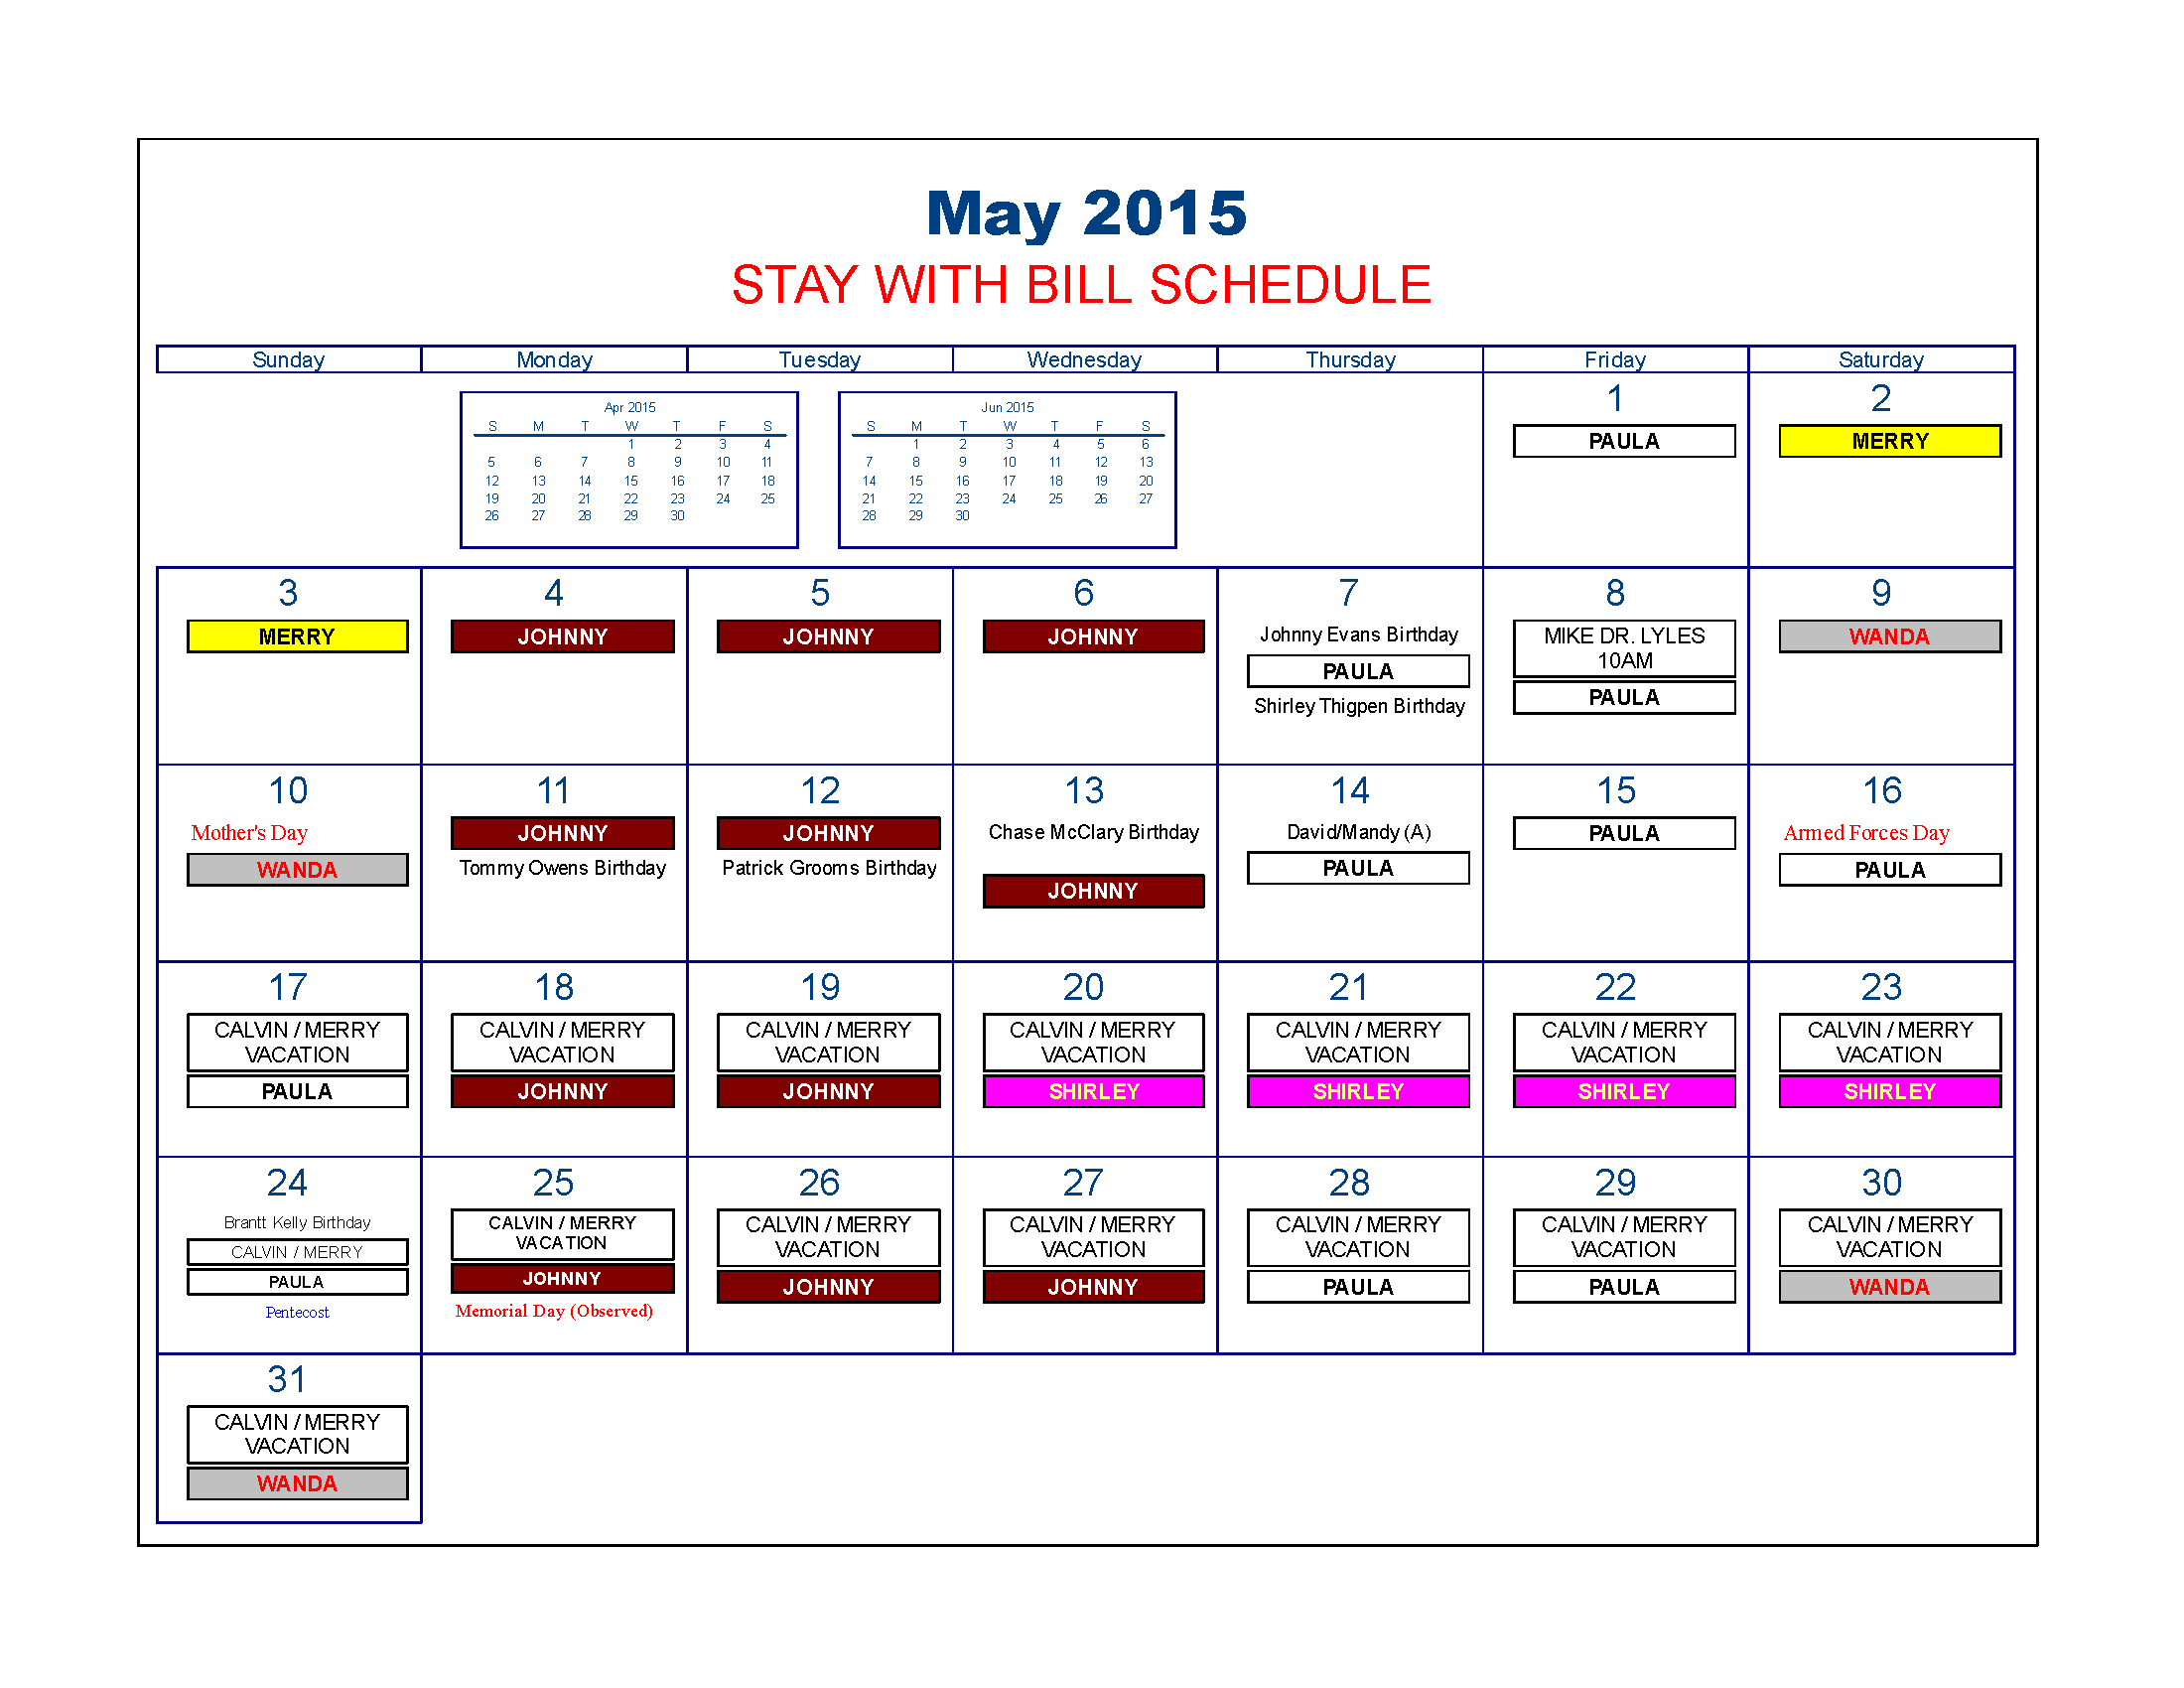 May15 Bill Schedule